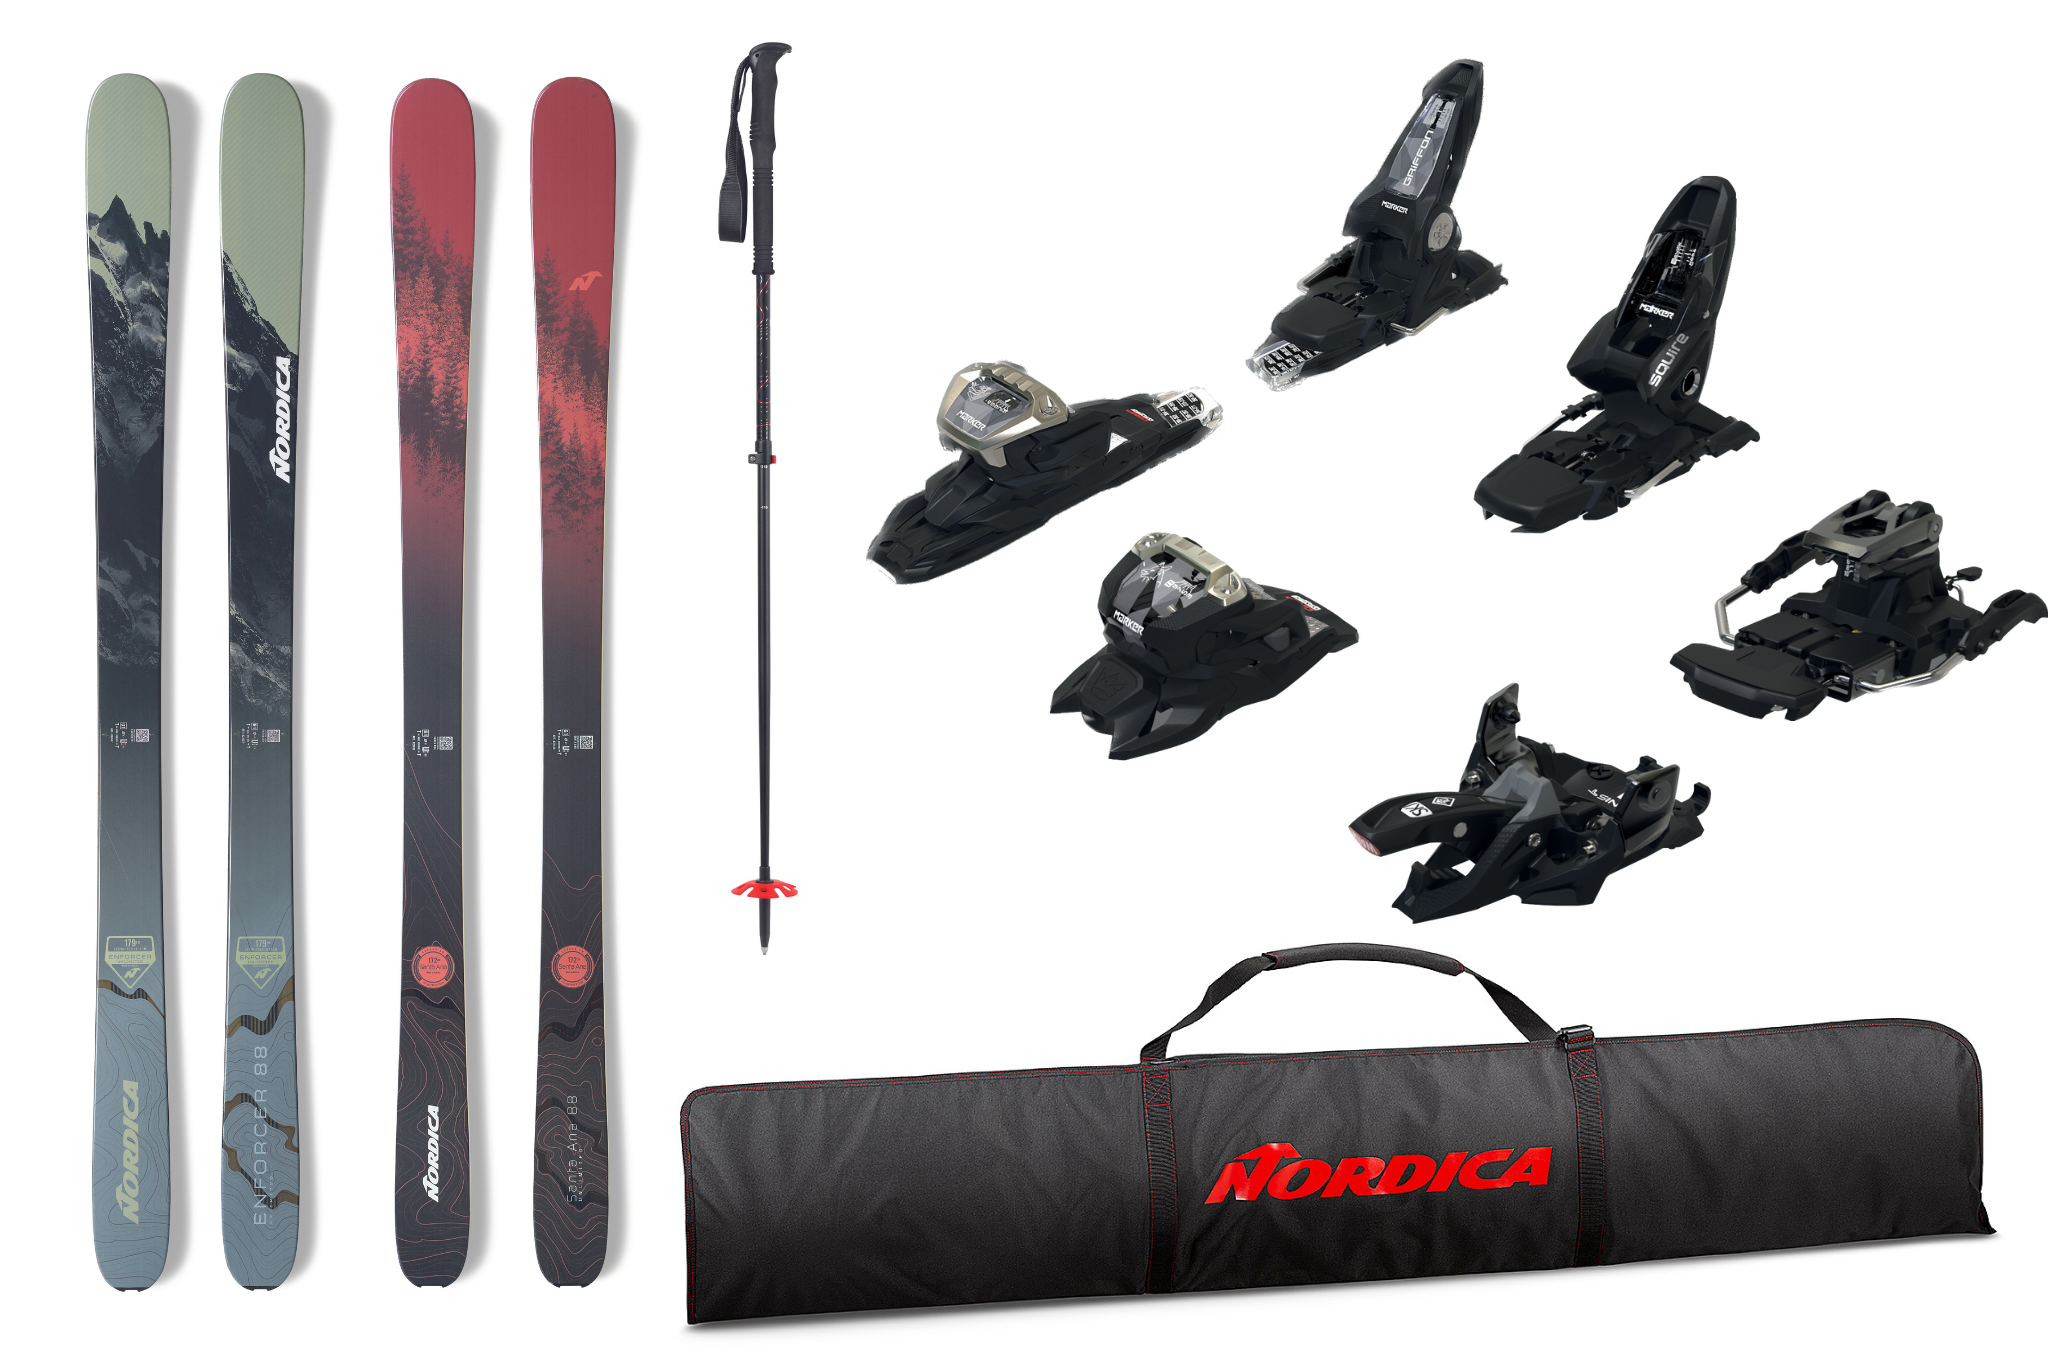 a bundle of ski gear, including men's and women's skis, poles, a ski bag and three types of bindings